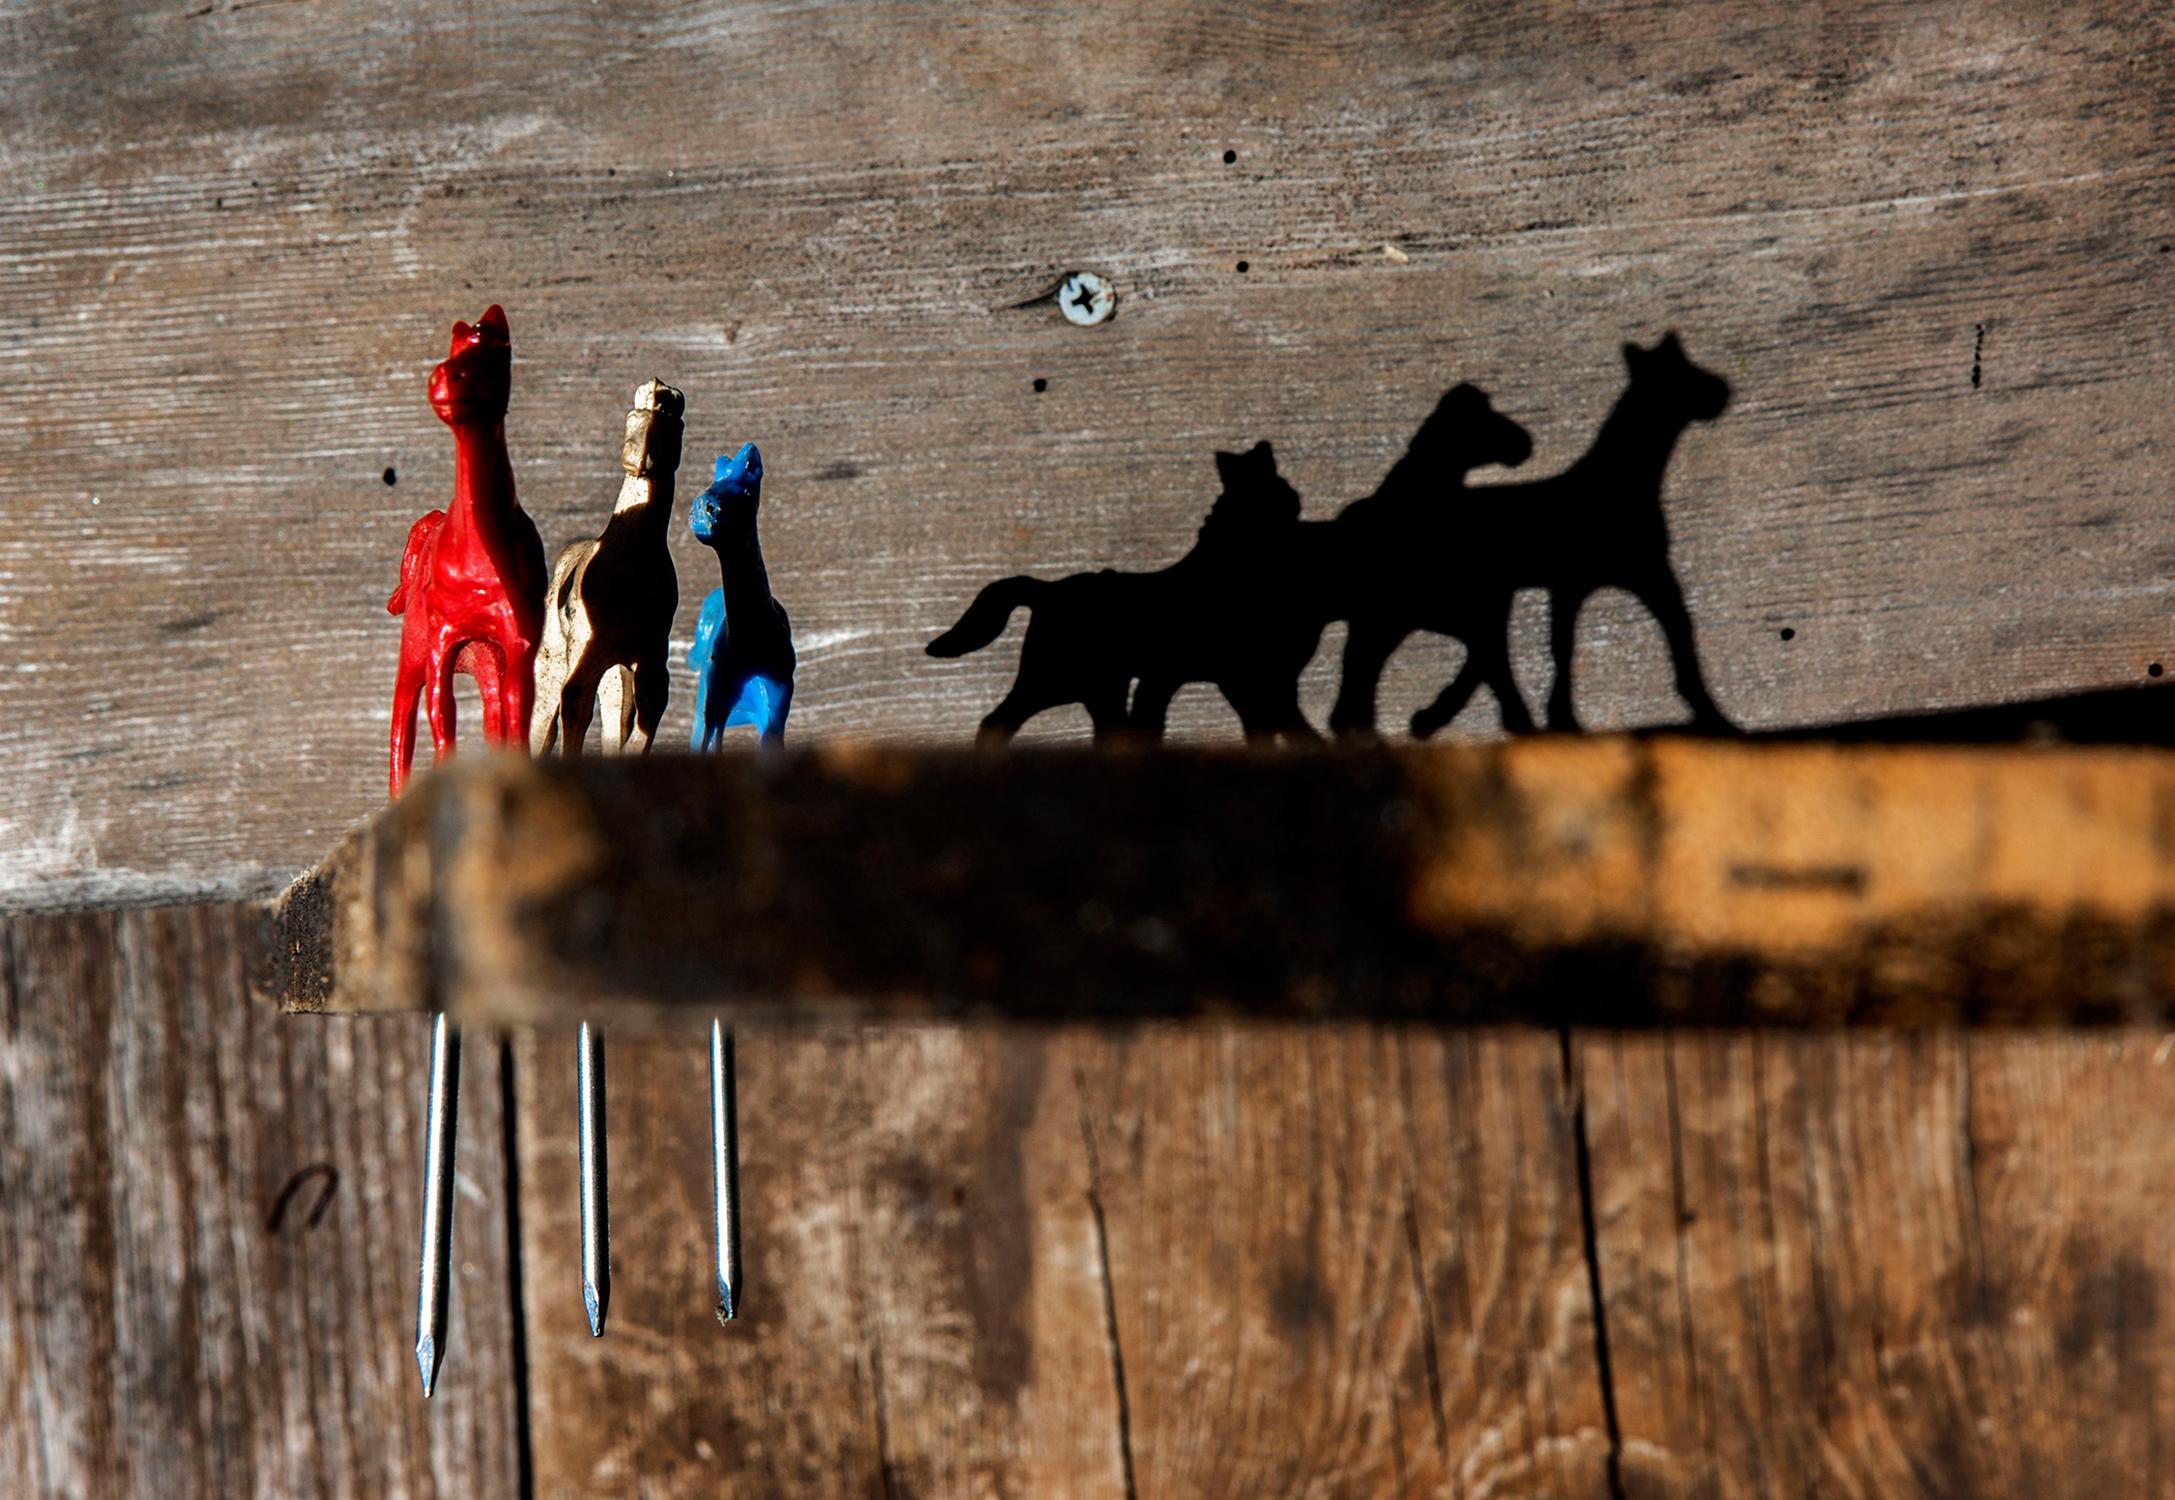 Shannon Davis Still-Life Photograph - "Freedom" - Southern, horses, staged photography, shadow, still life